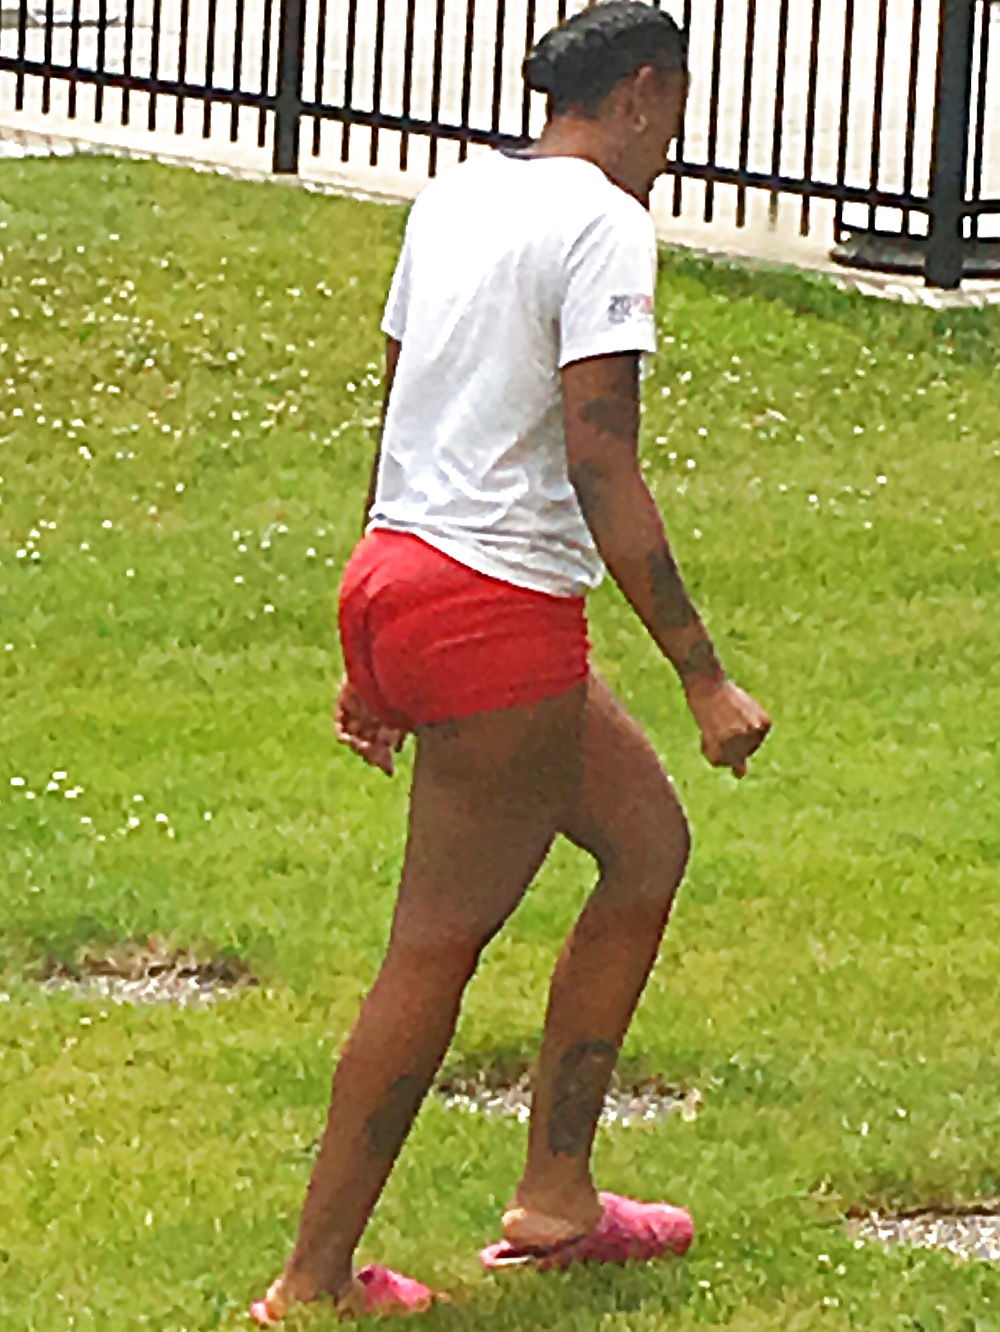 Ebony amazing tight pantie line in tight red shorts!! (1/5)